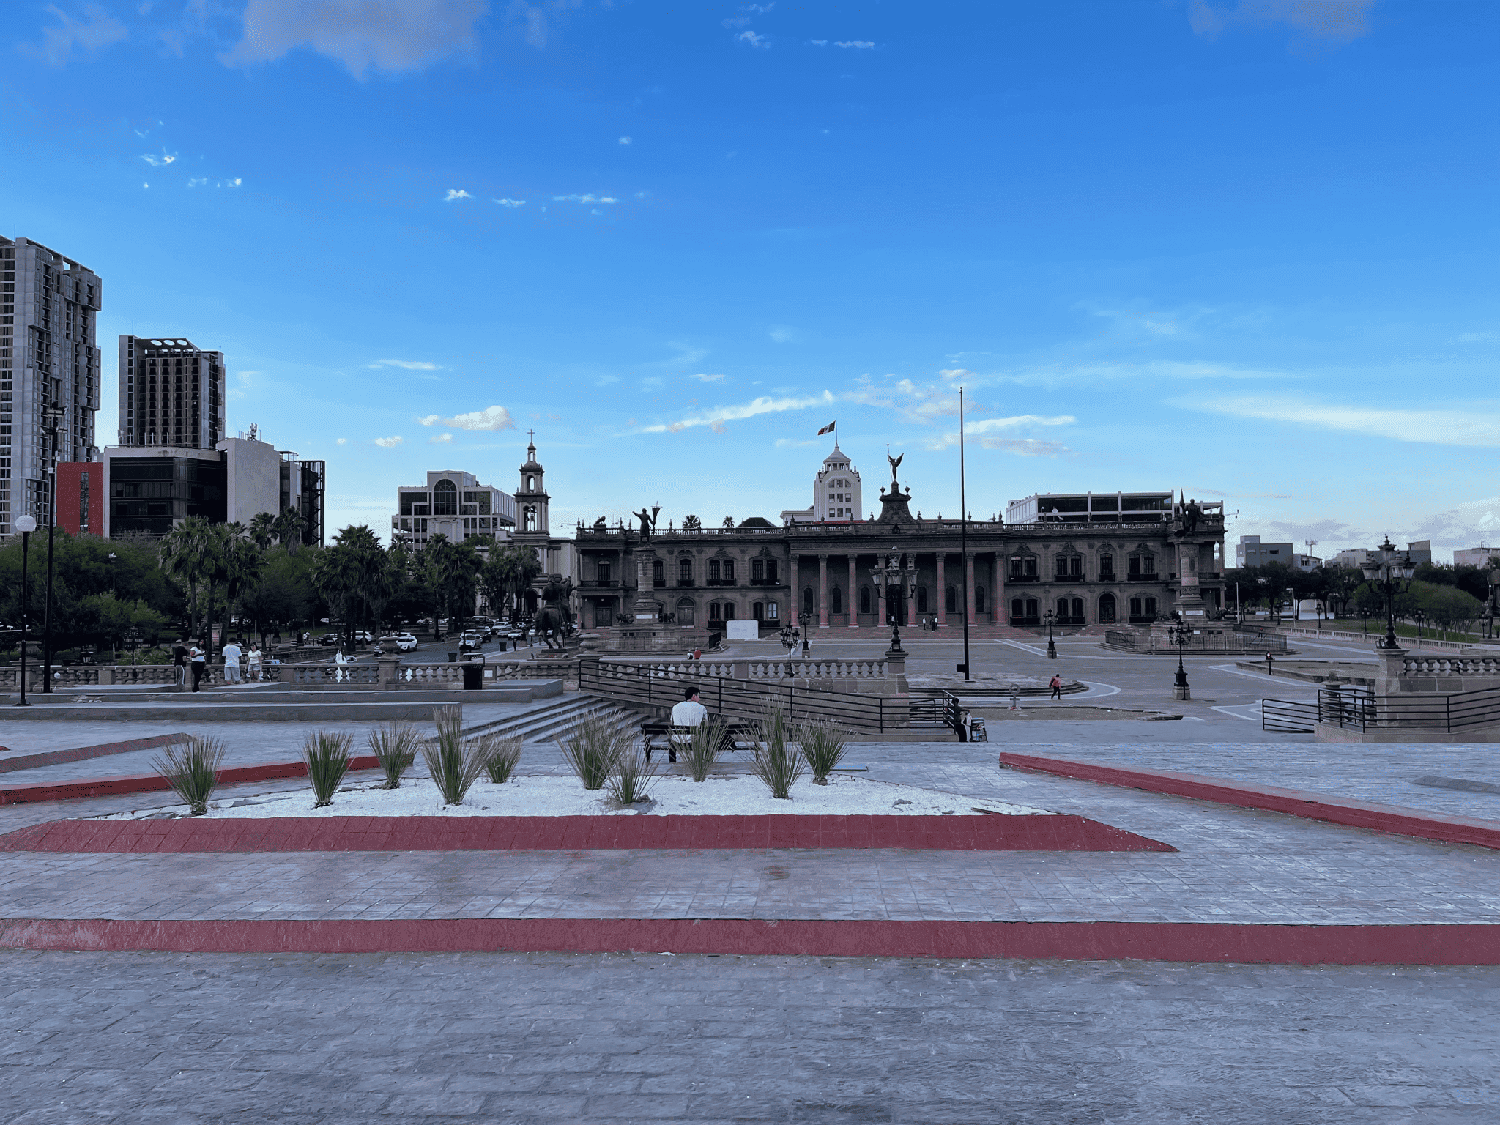 A large open plaza with buildings at the far end.